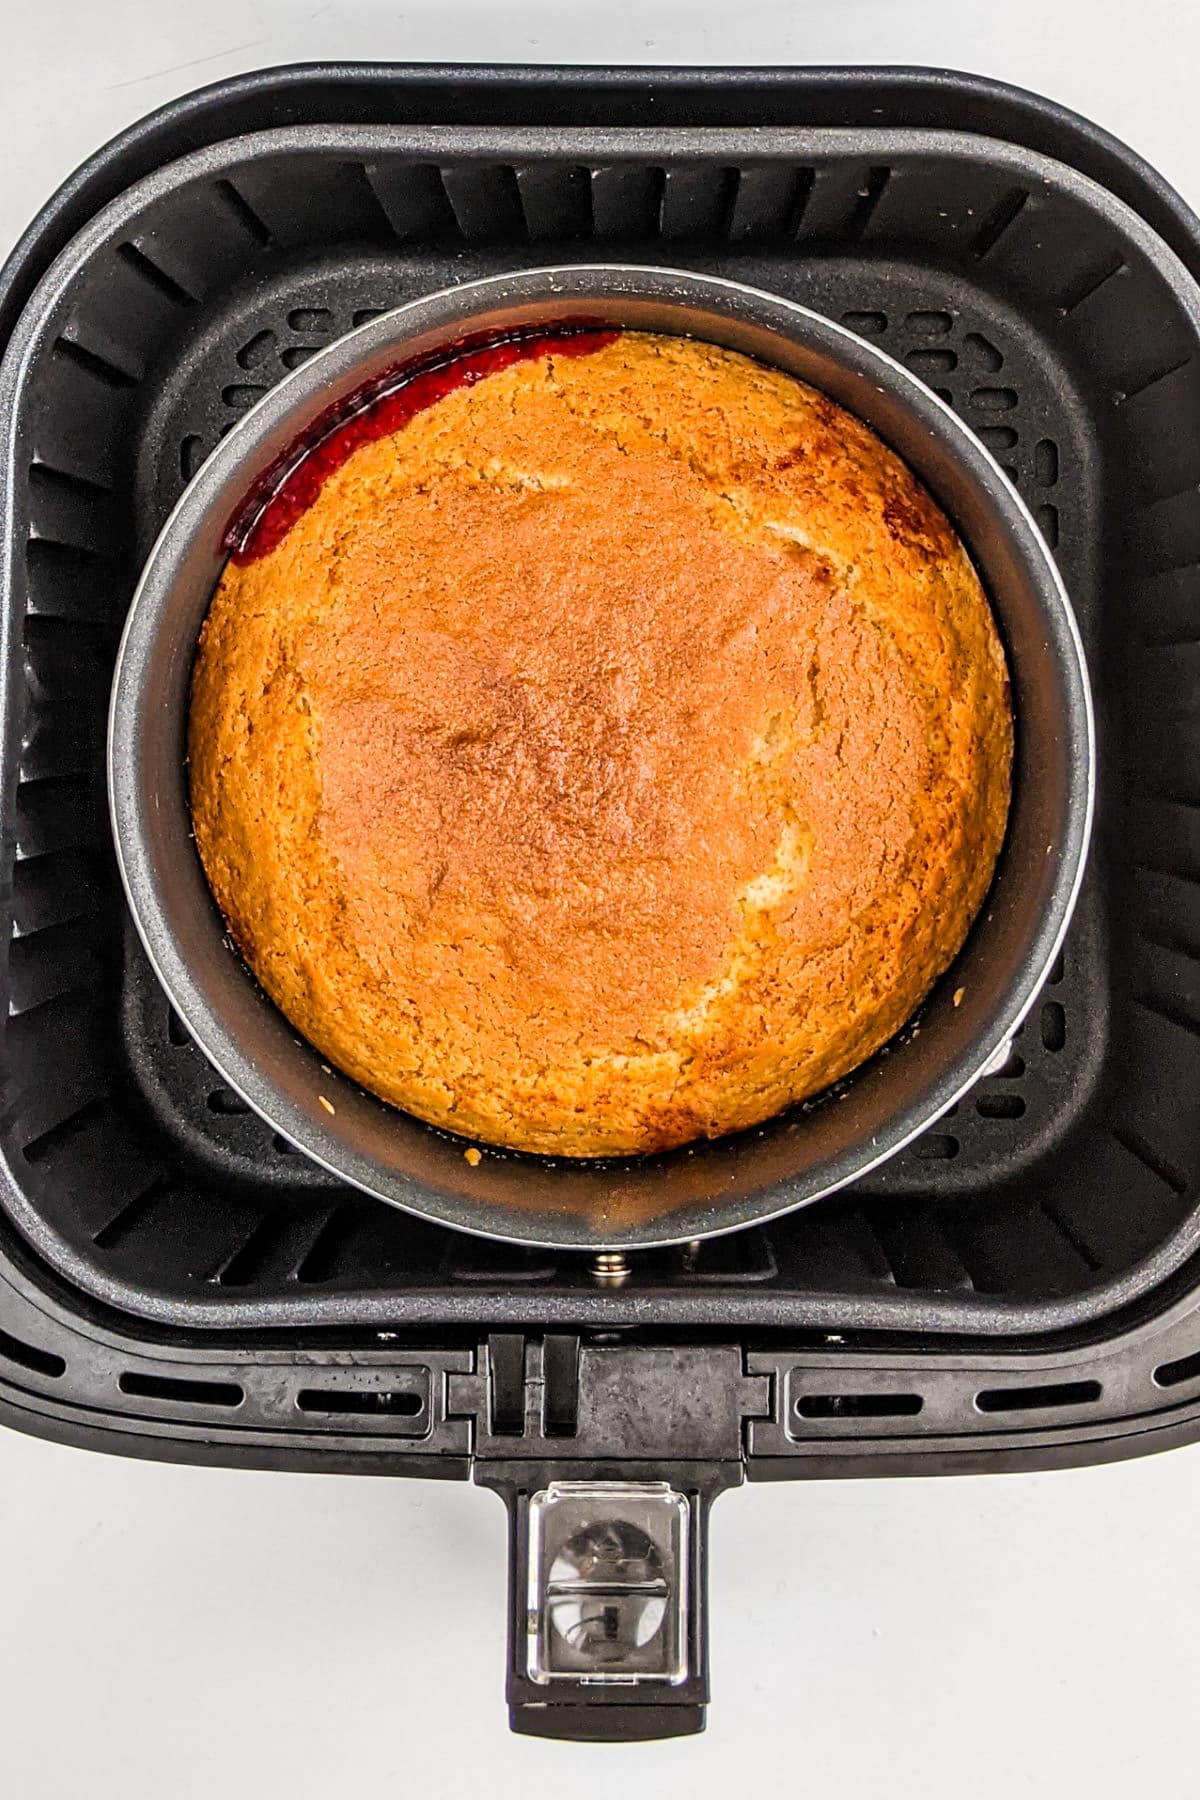 Baked plum cake in a the air fryer basket.